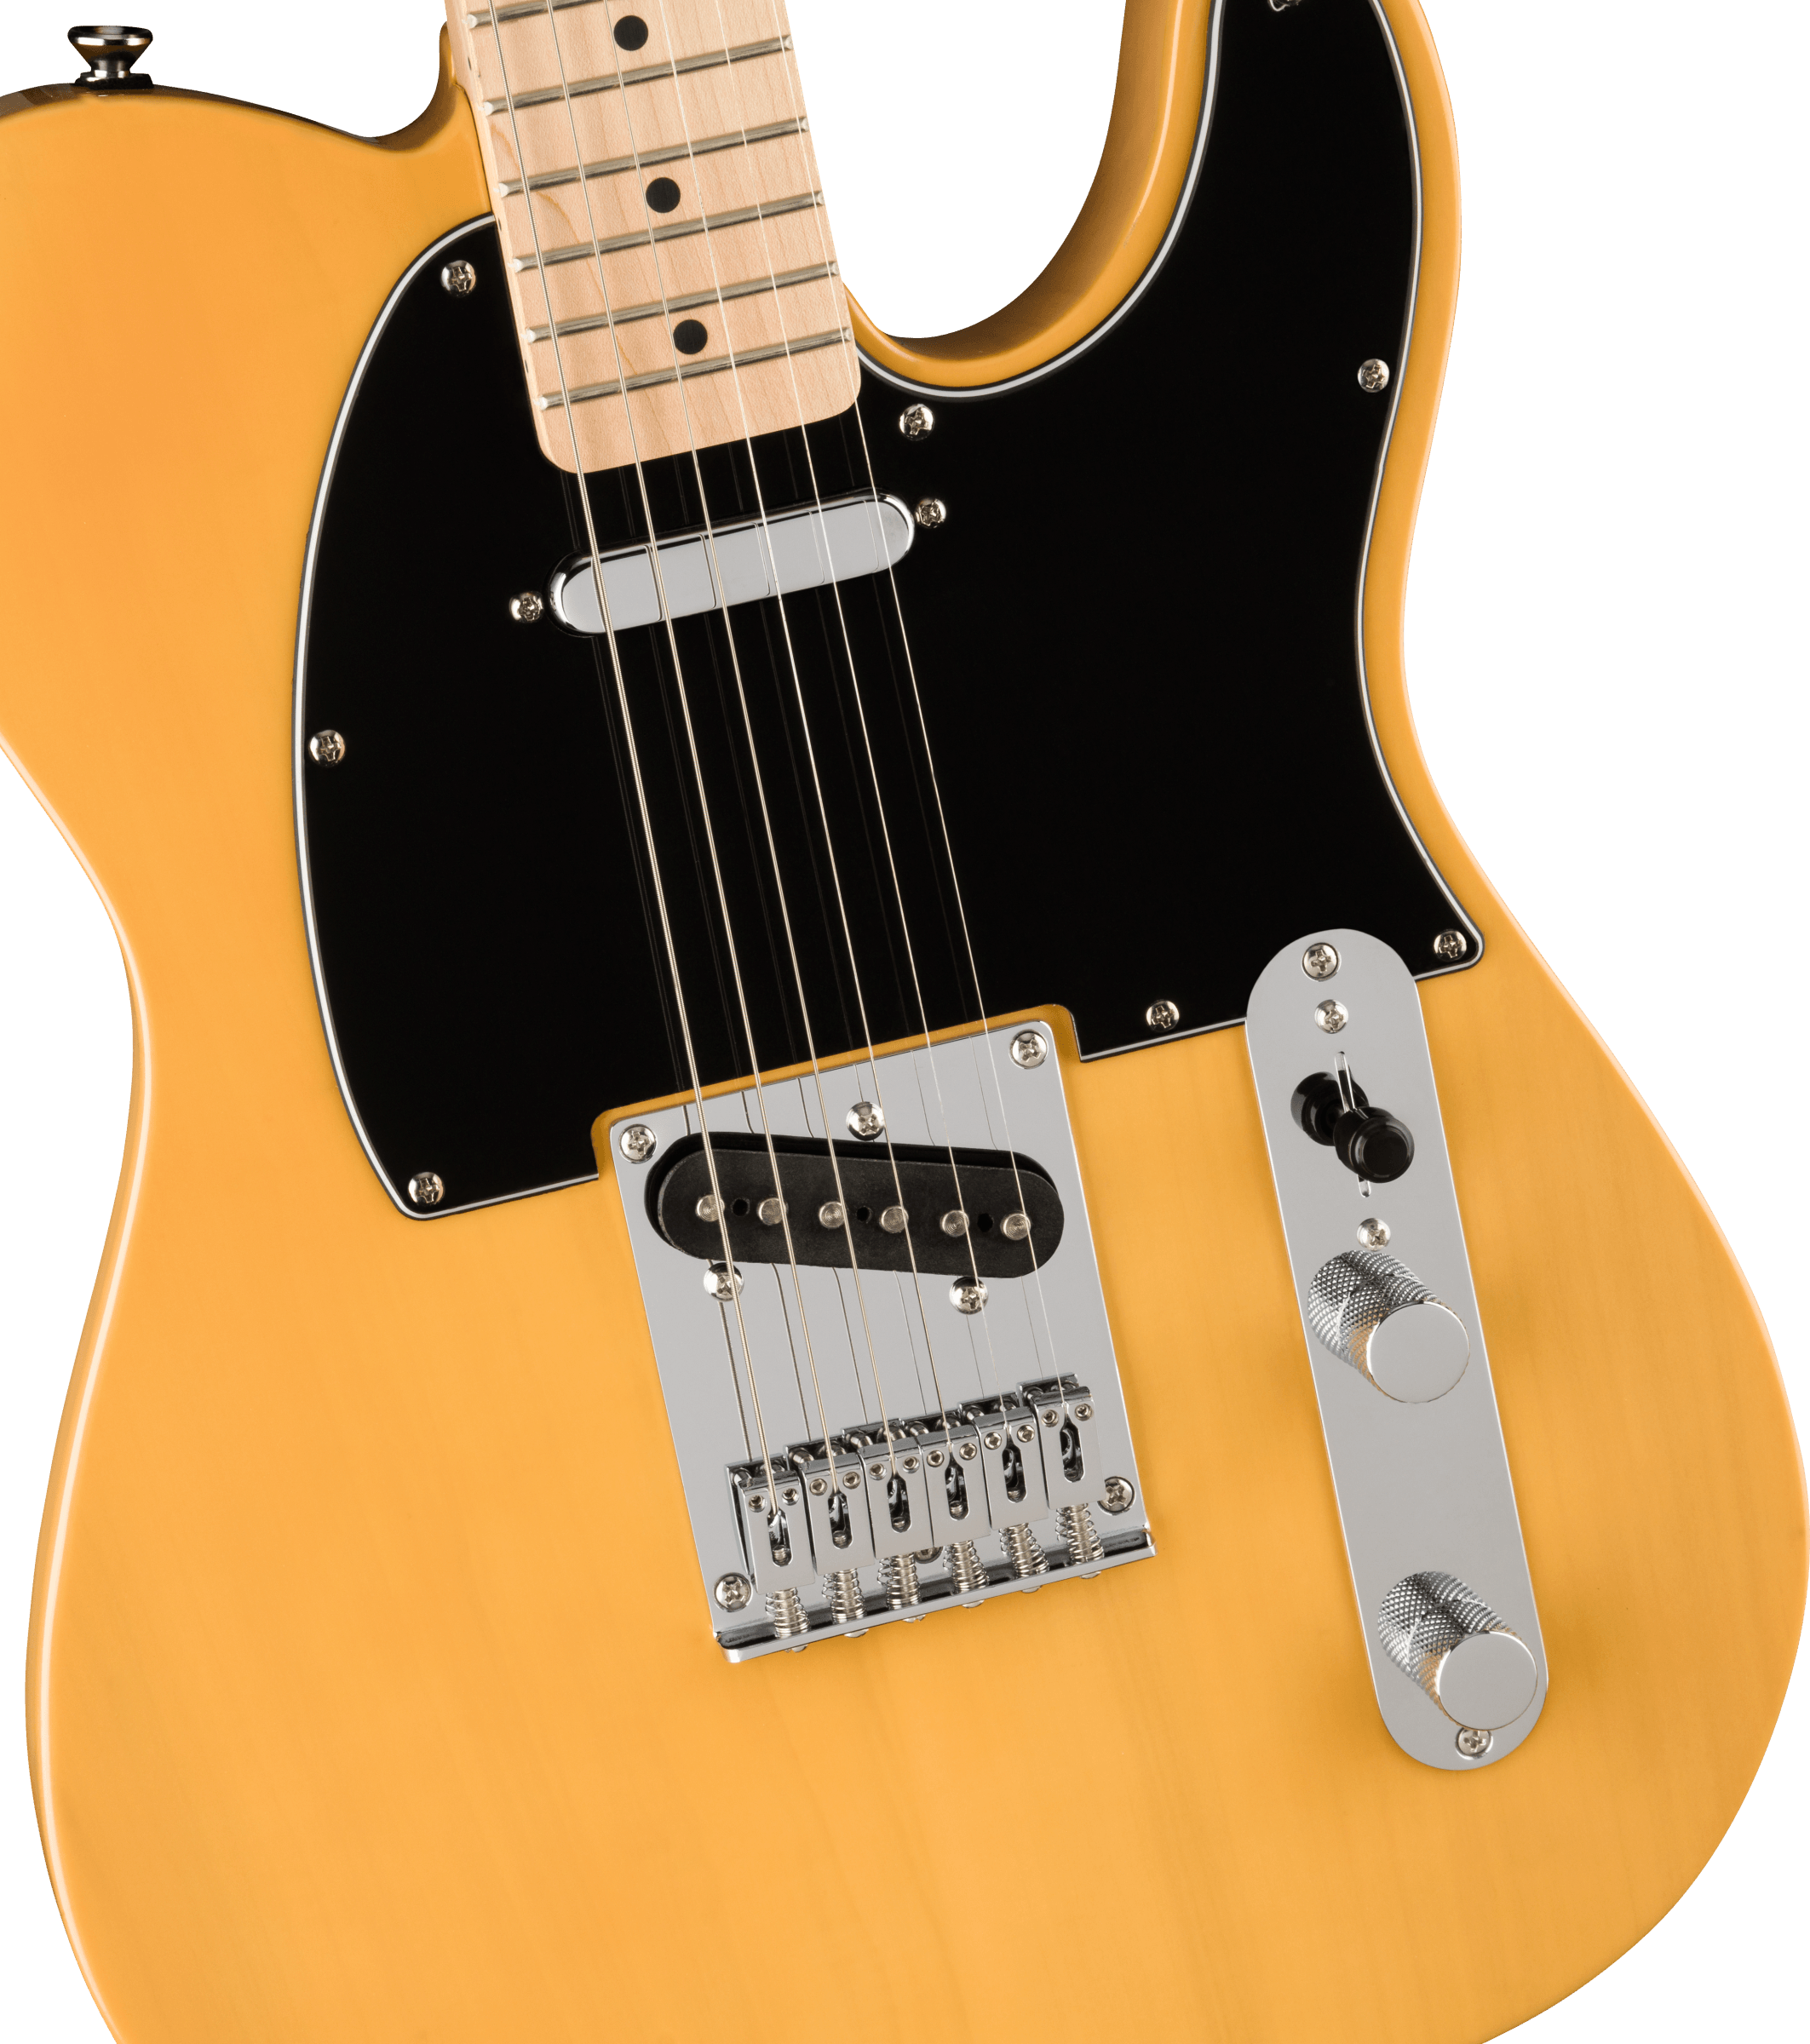 Squier Affinity Series Telecaster - Butterscotch Blonde